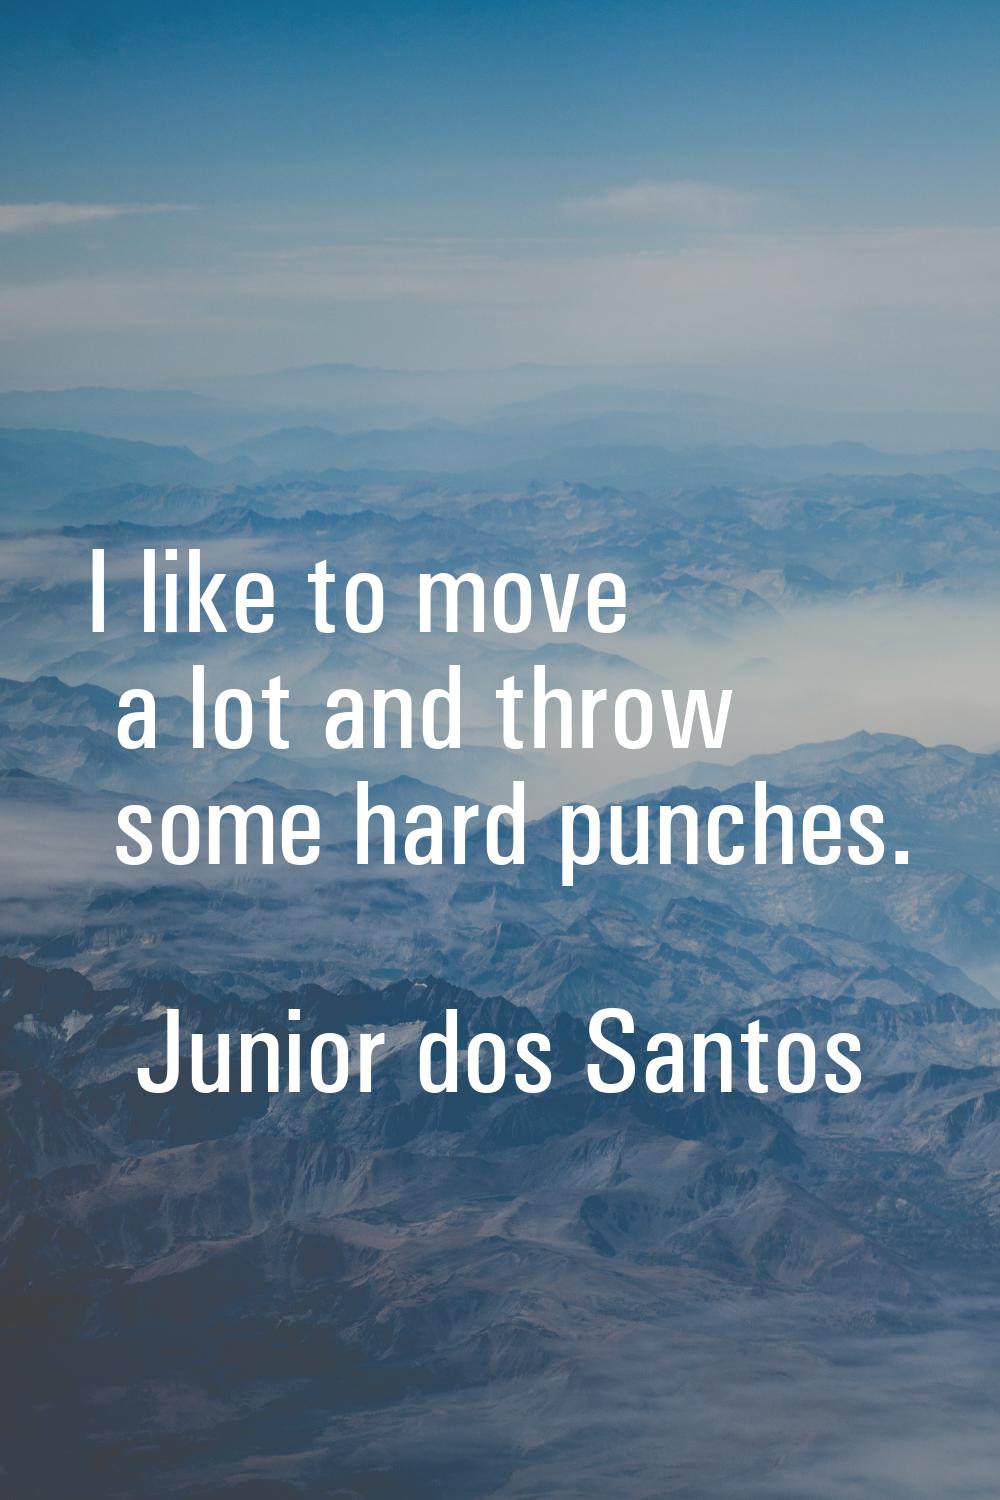 I like to move a lot and throw some hard punches.